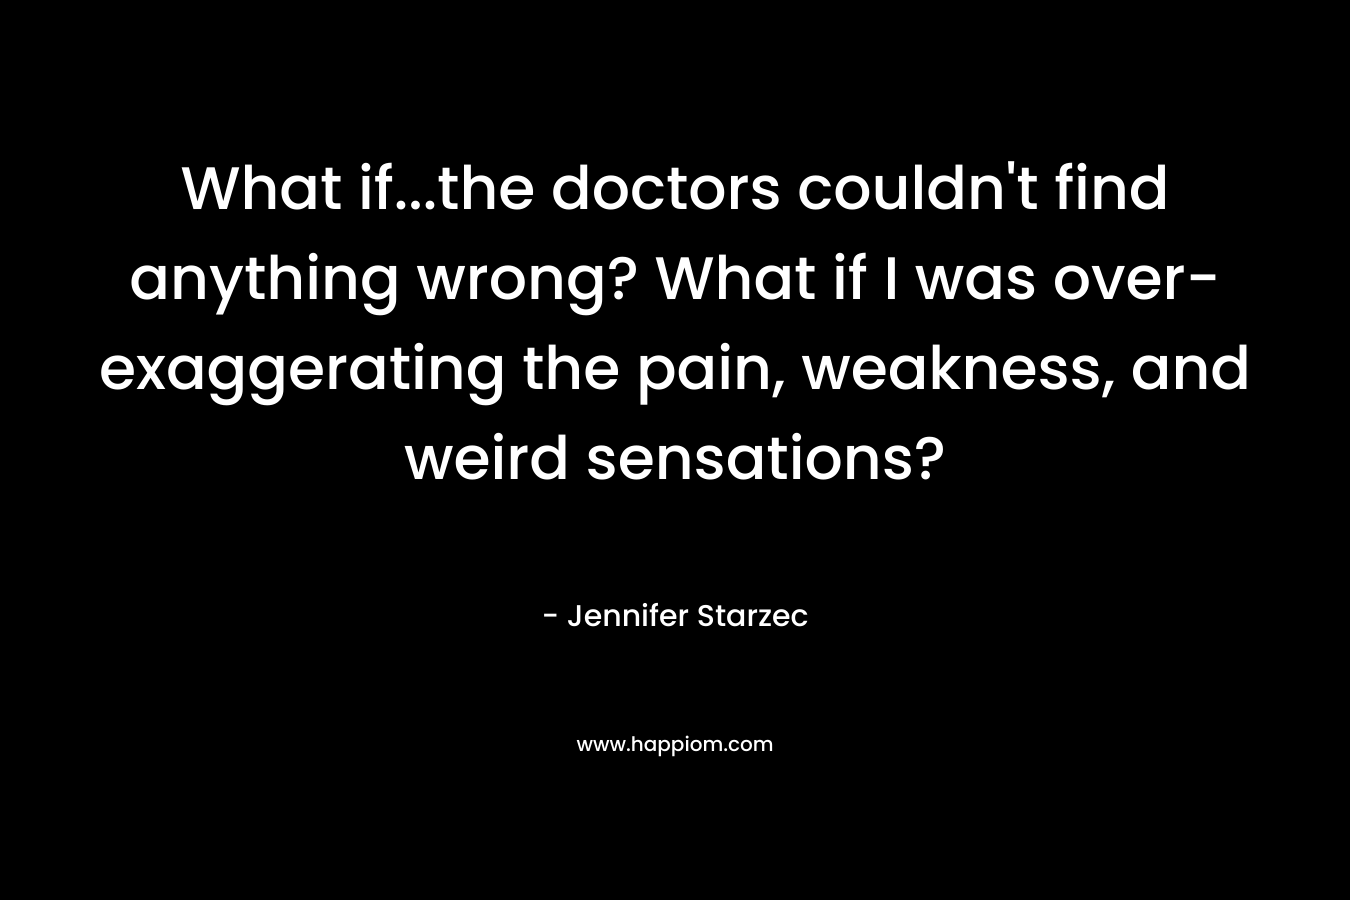 What if...the doctors couldn't find anything wrong? What if I was over-exaggerating the pain, weakness, and weird sensations?